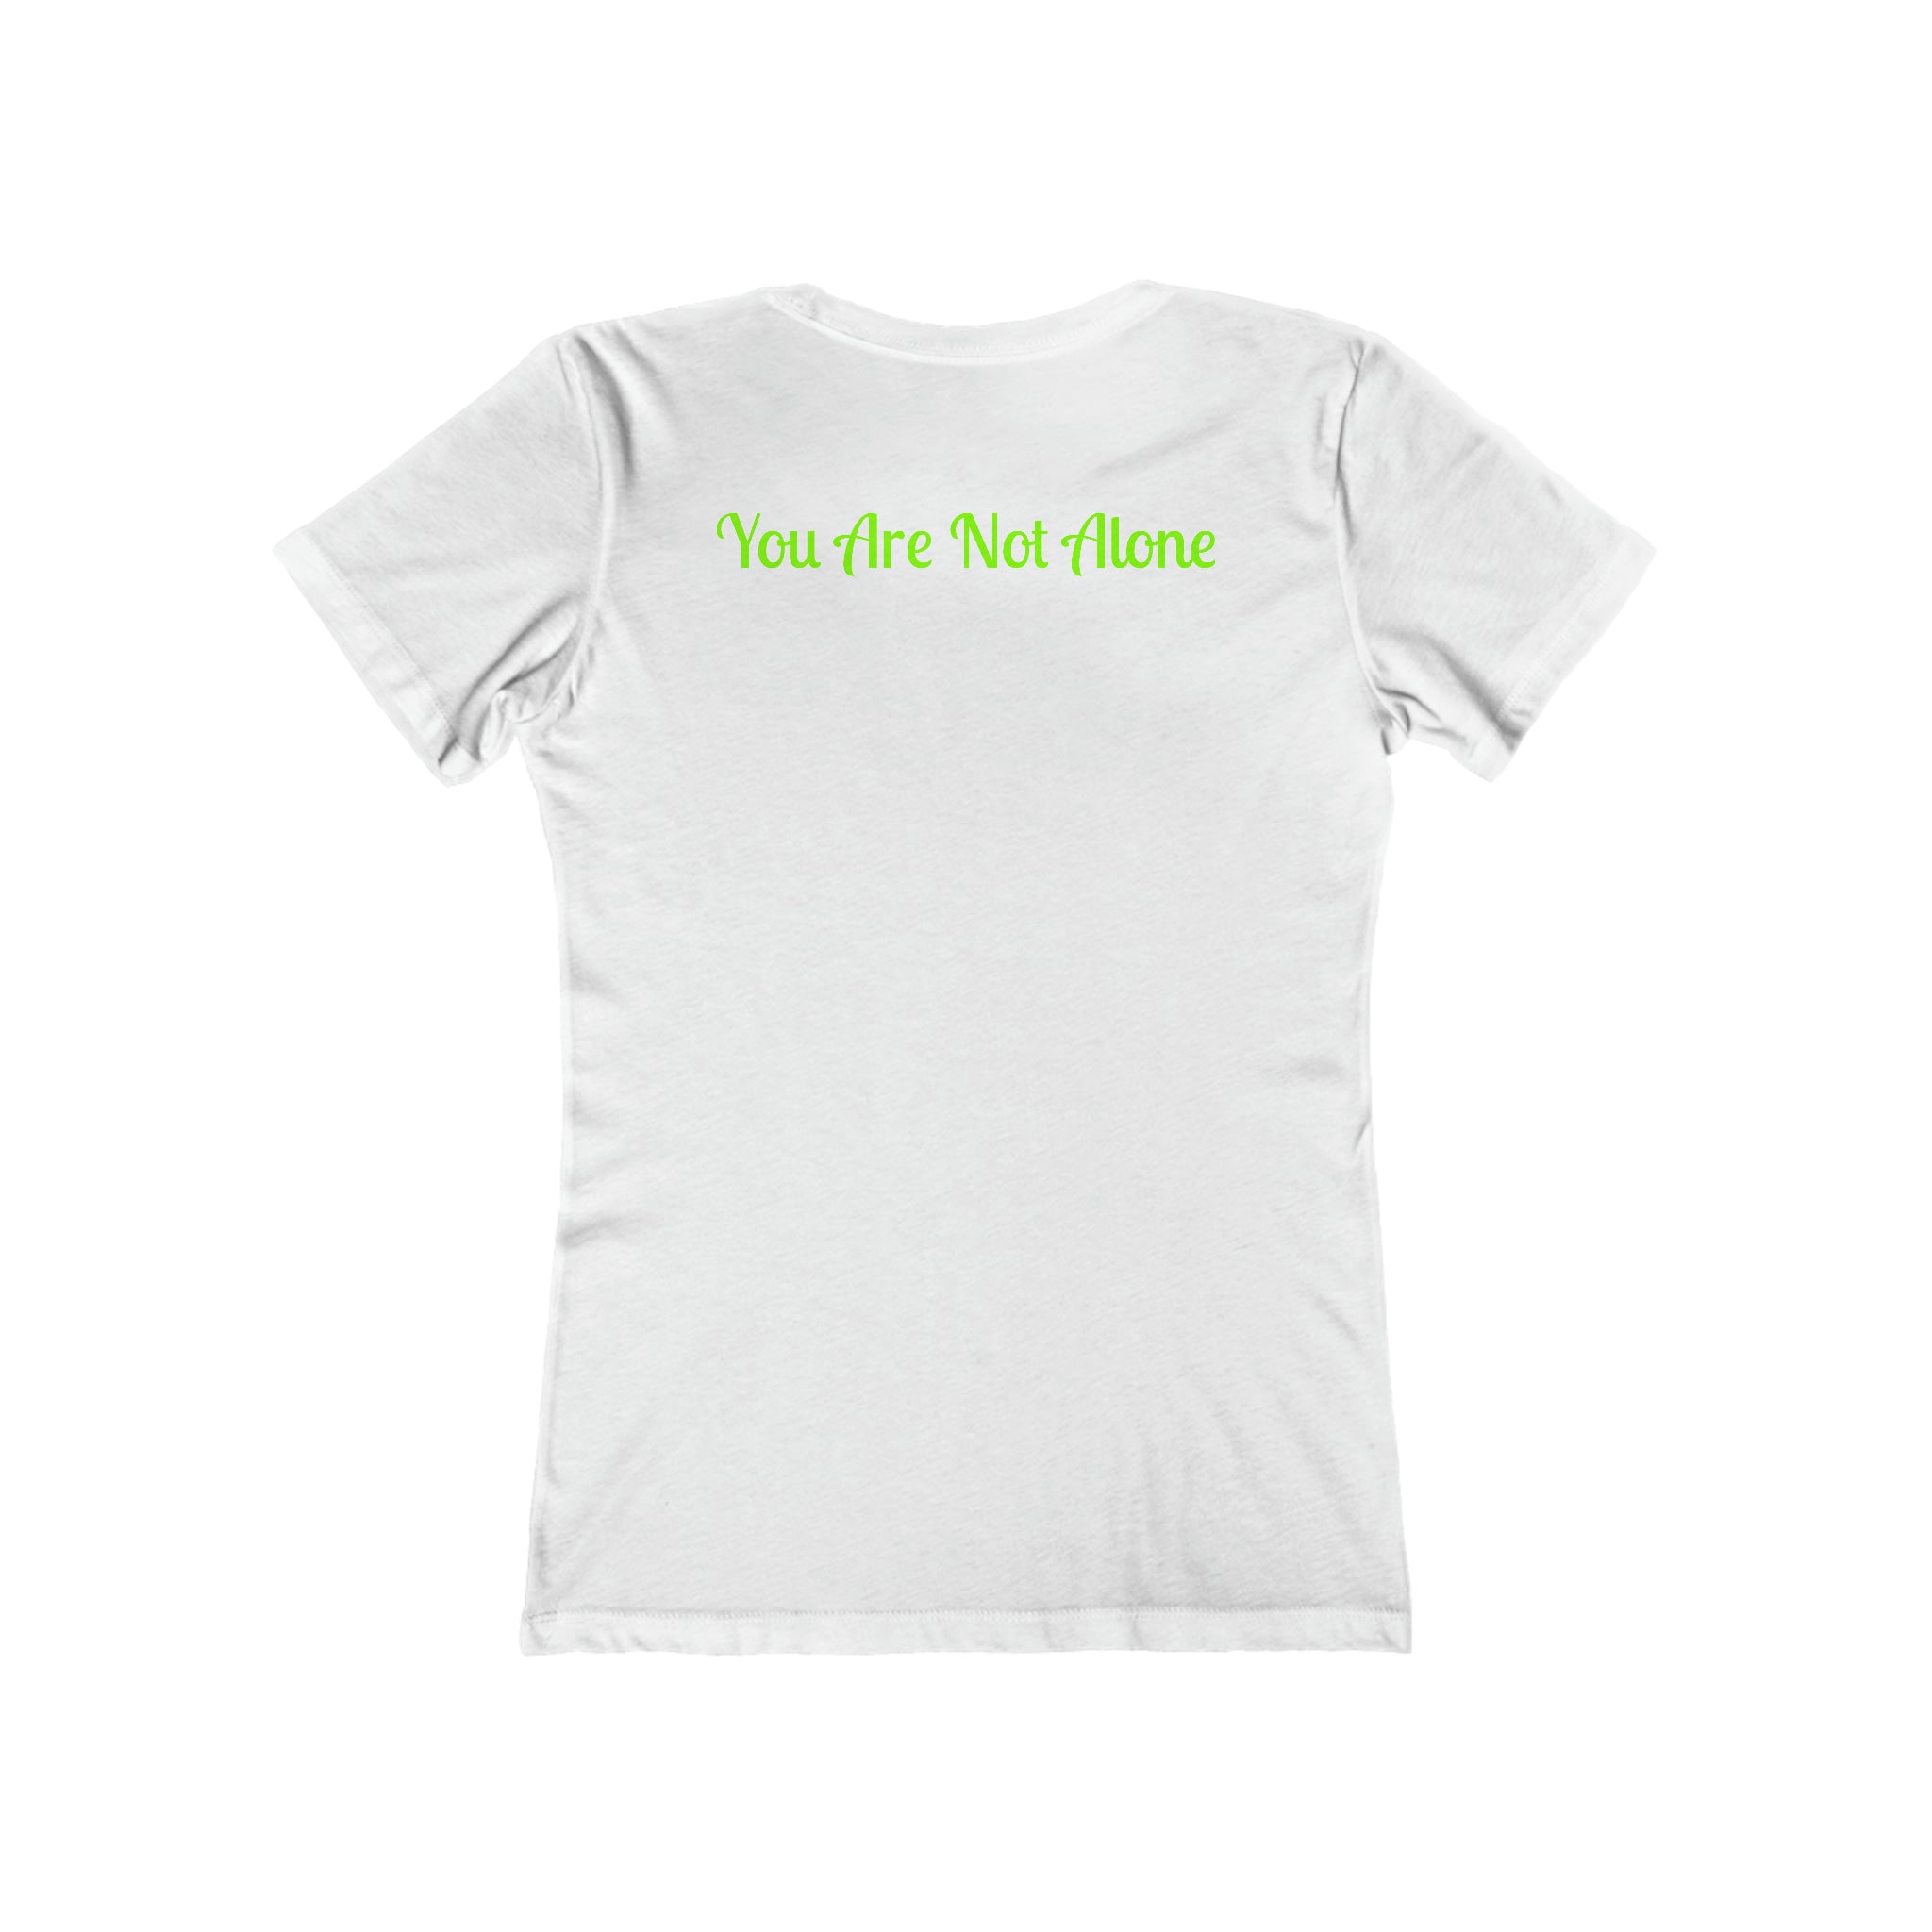 You Are Not Alone Boyfriend Tee: Stand Together Solid White Awareness Break the Stigma Mental Health Support Pledge Donation slim fit shirt Tee women shirt T-Shirt 8282019870666075211_2048_e7d1cb40-7958-45df-bd56-d9617618f4eb Printify